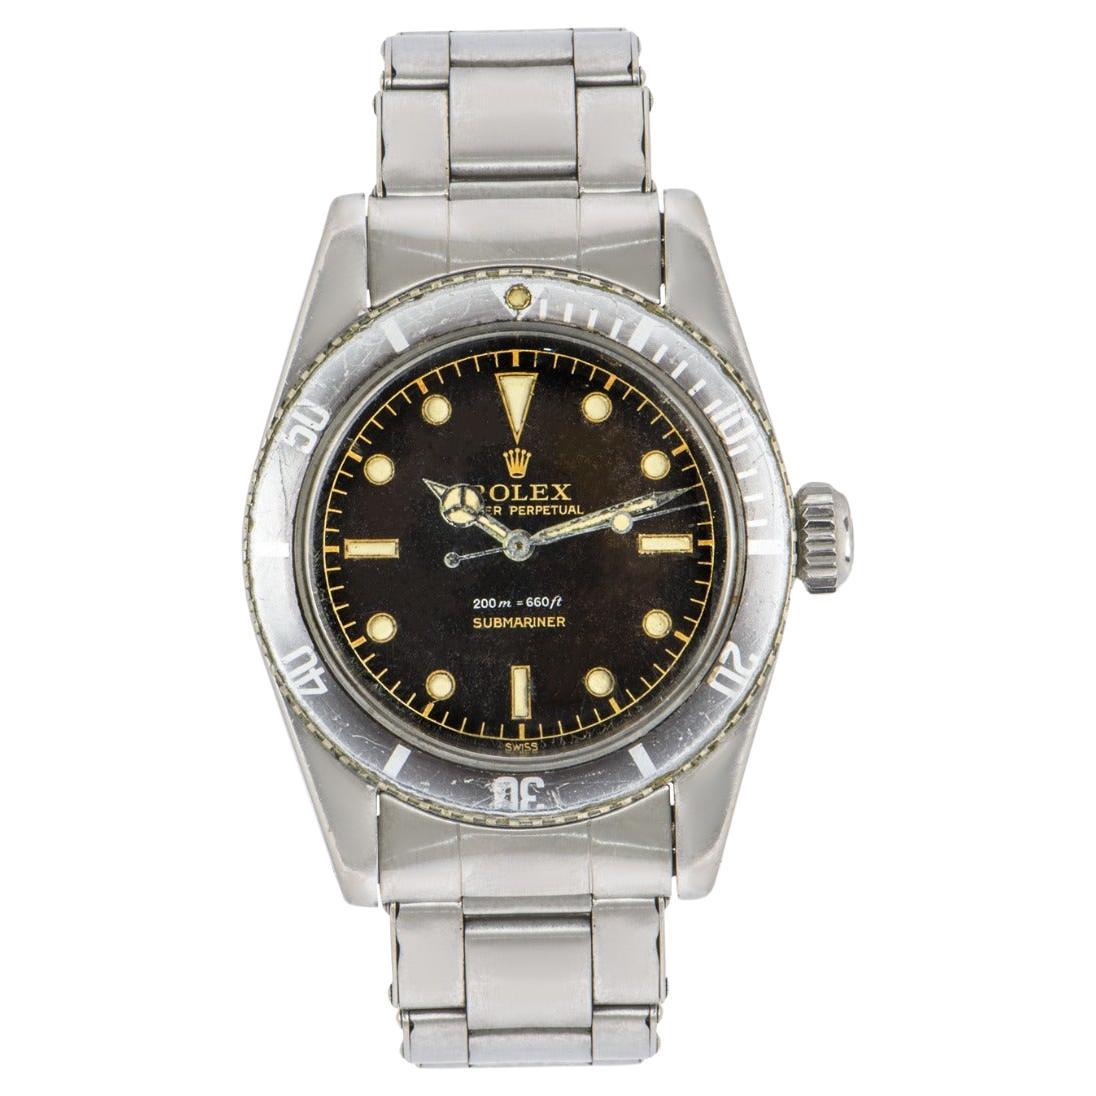 Rare Vintage Rolex Submariner James Bond Big Crown Stainless Steel Automatic For Sale